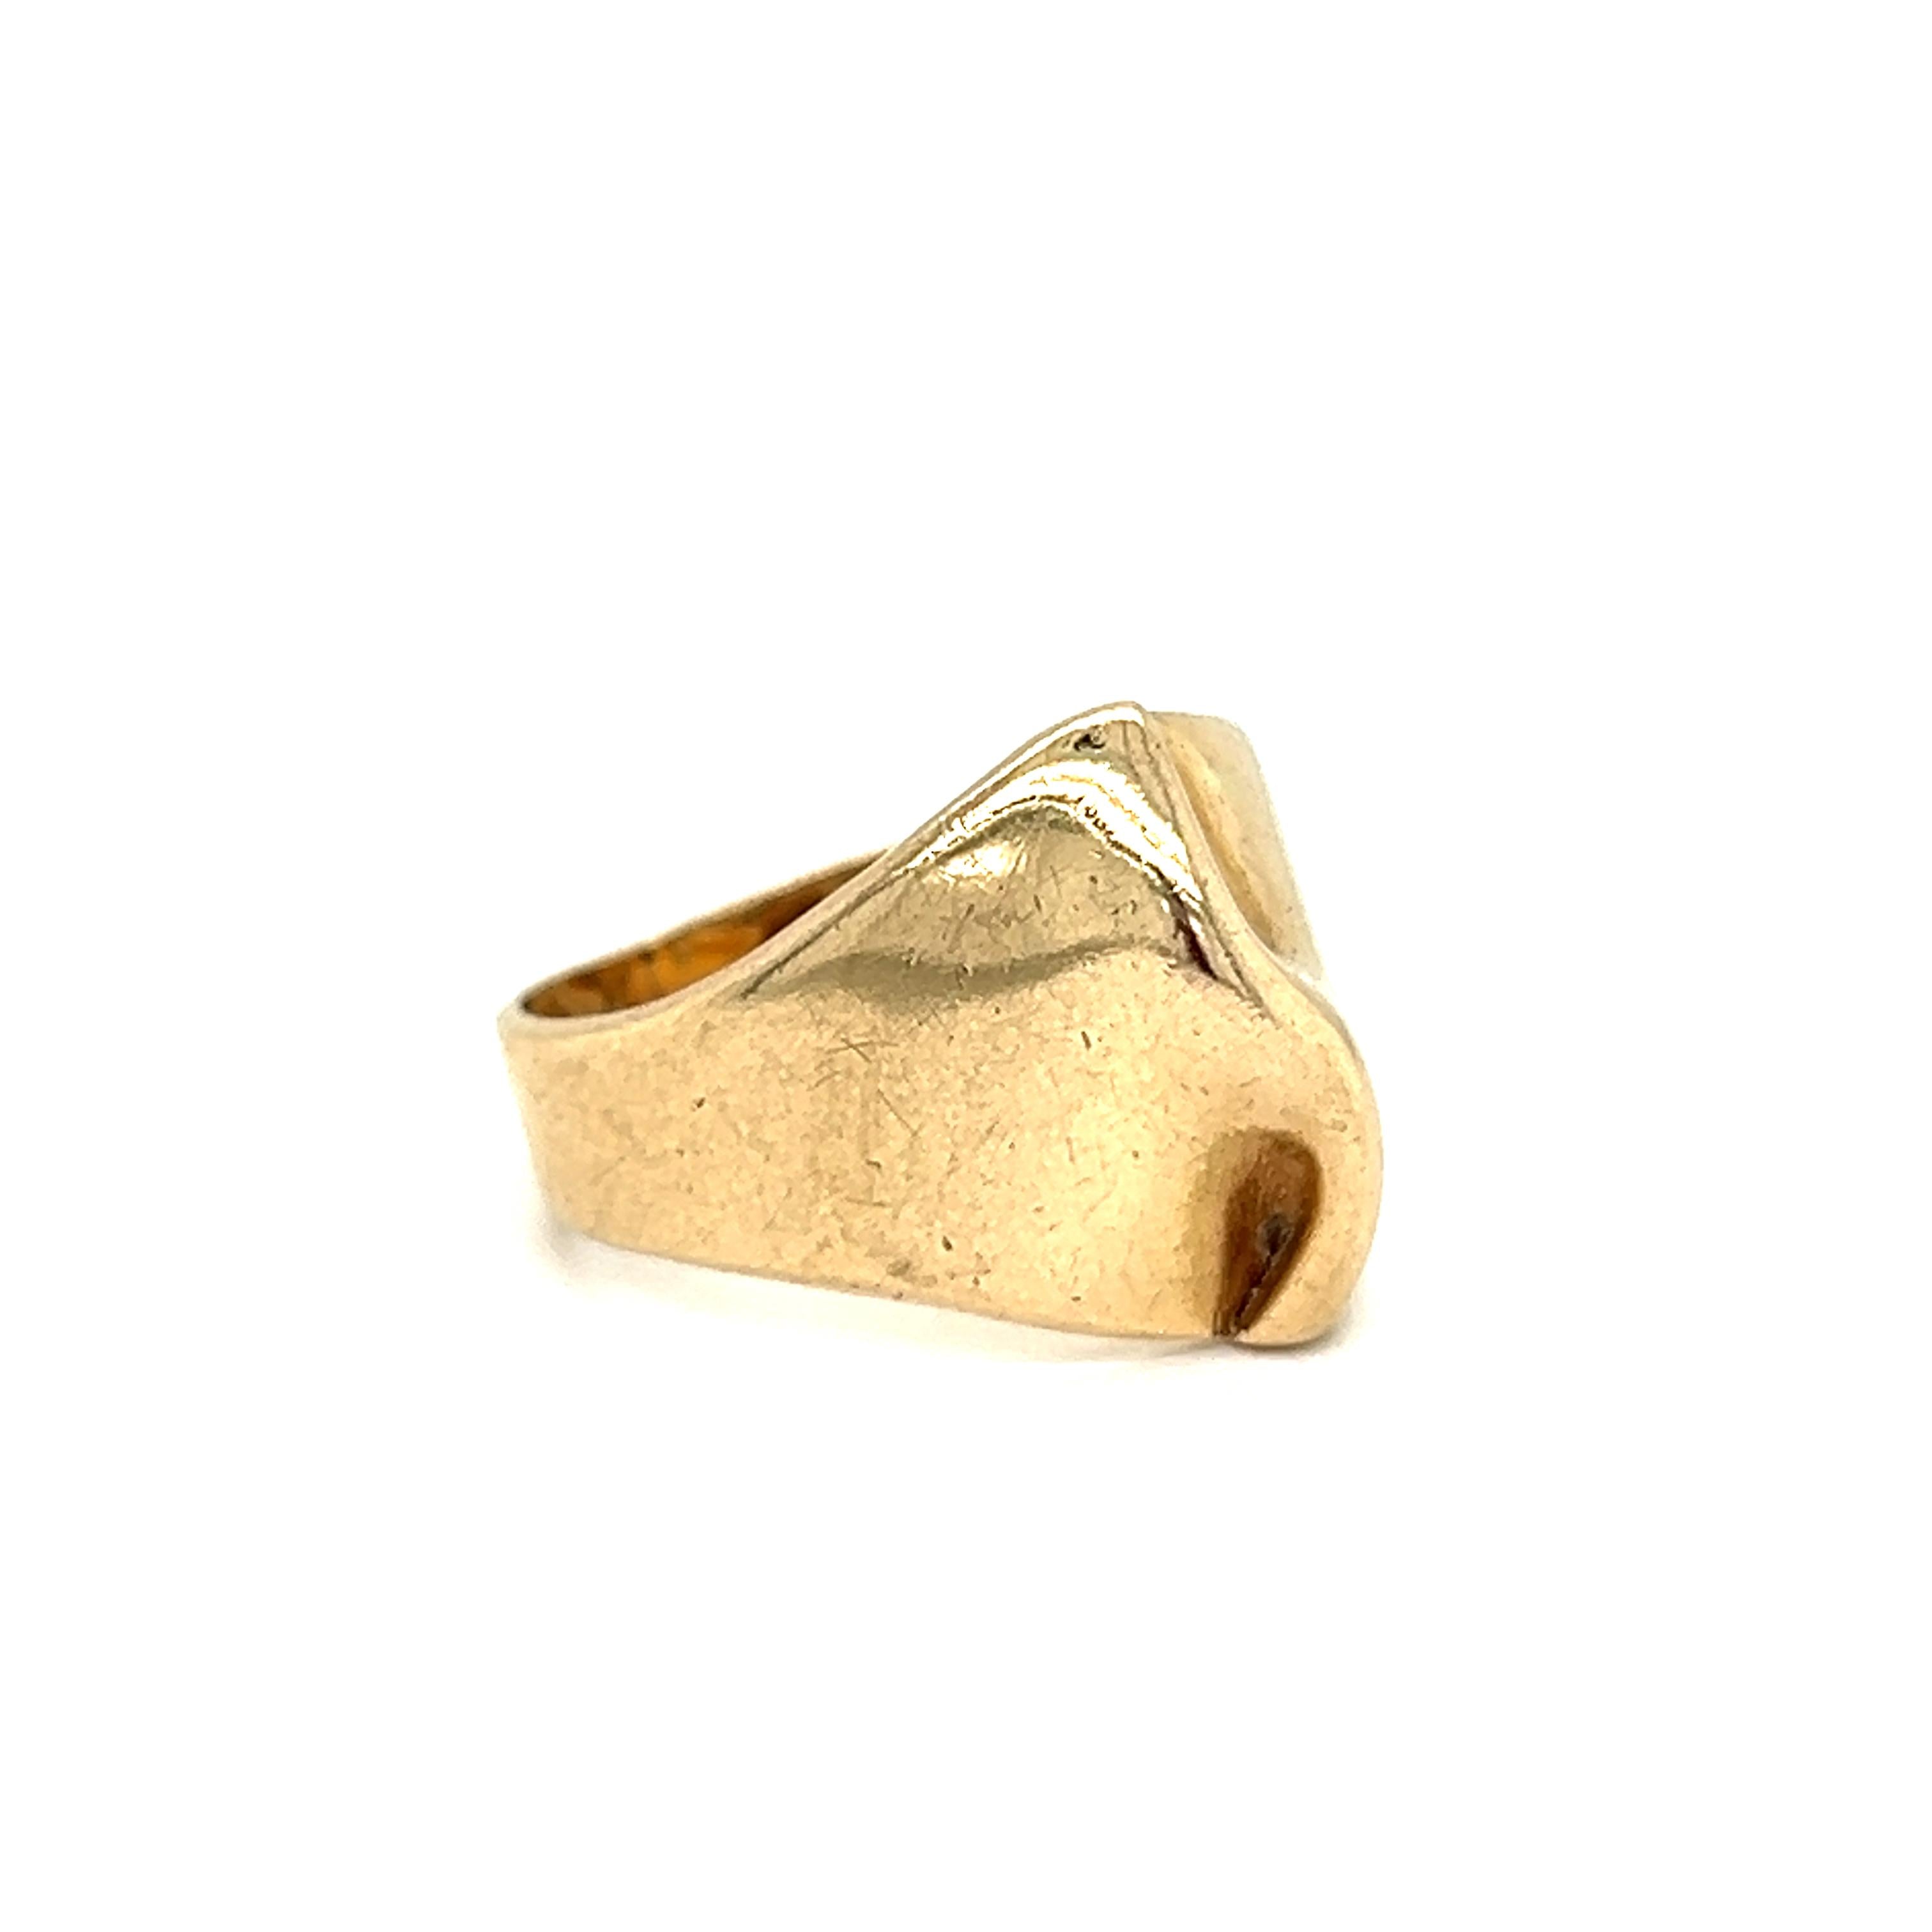 Vintage 14k Gold Pinched Band Ring